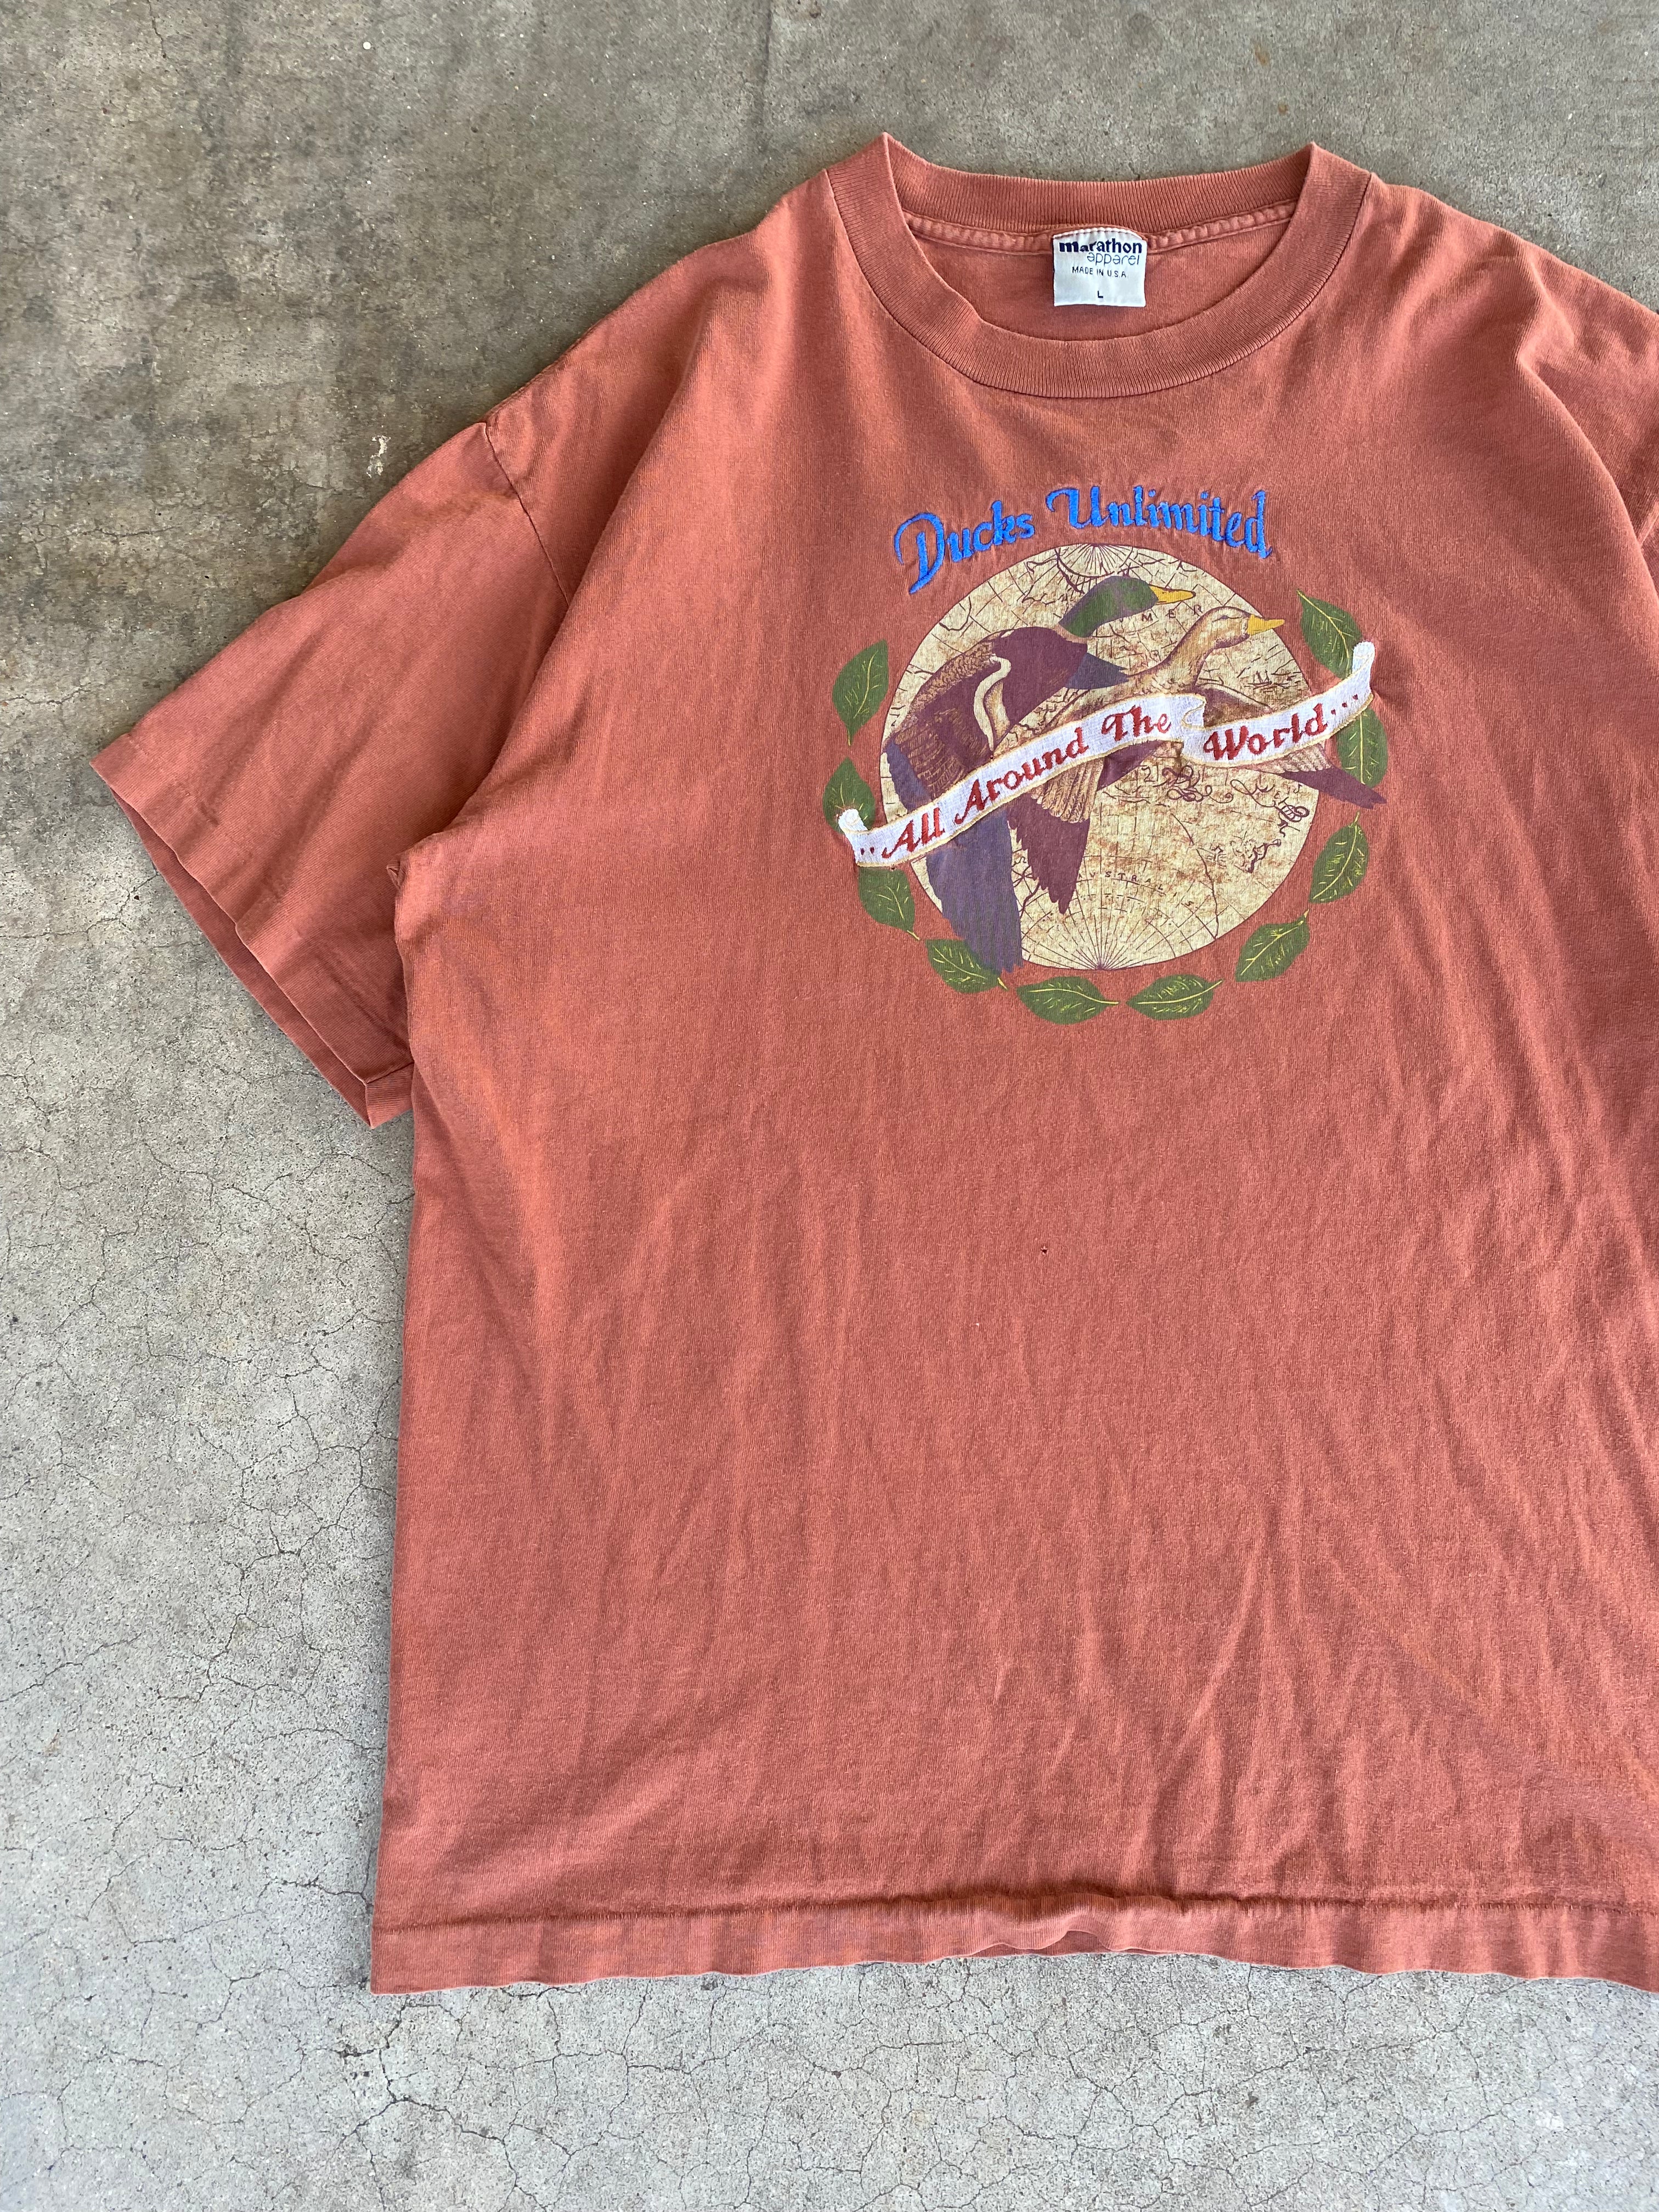 1990s Ducks Unlimited “All Around the World…” T-Shirt (L)